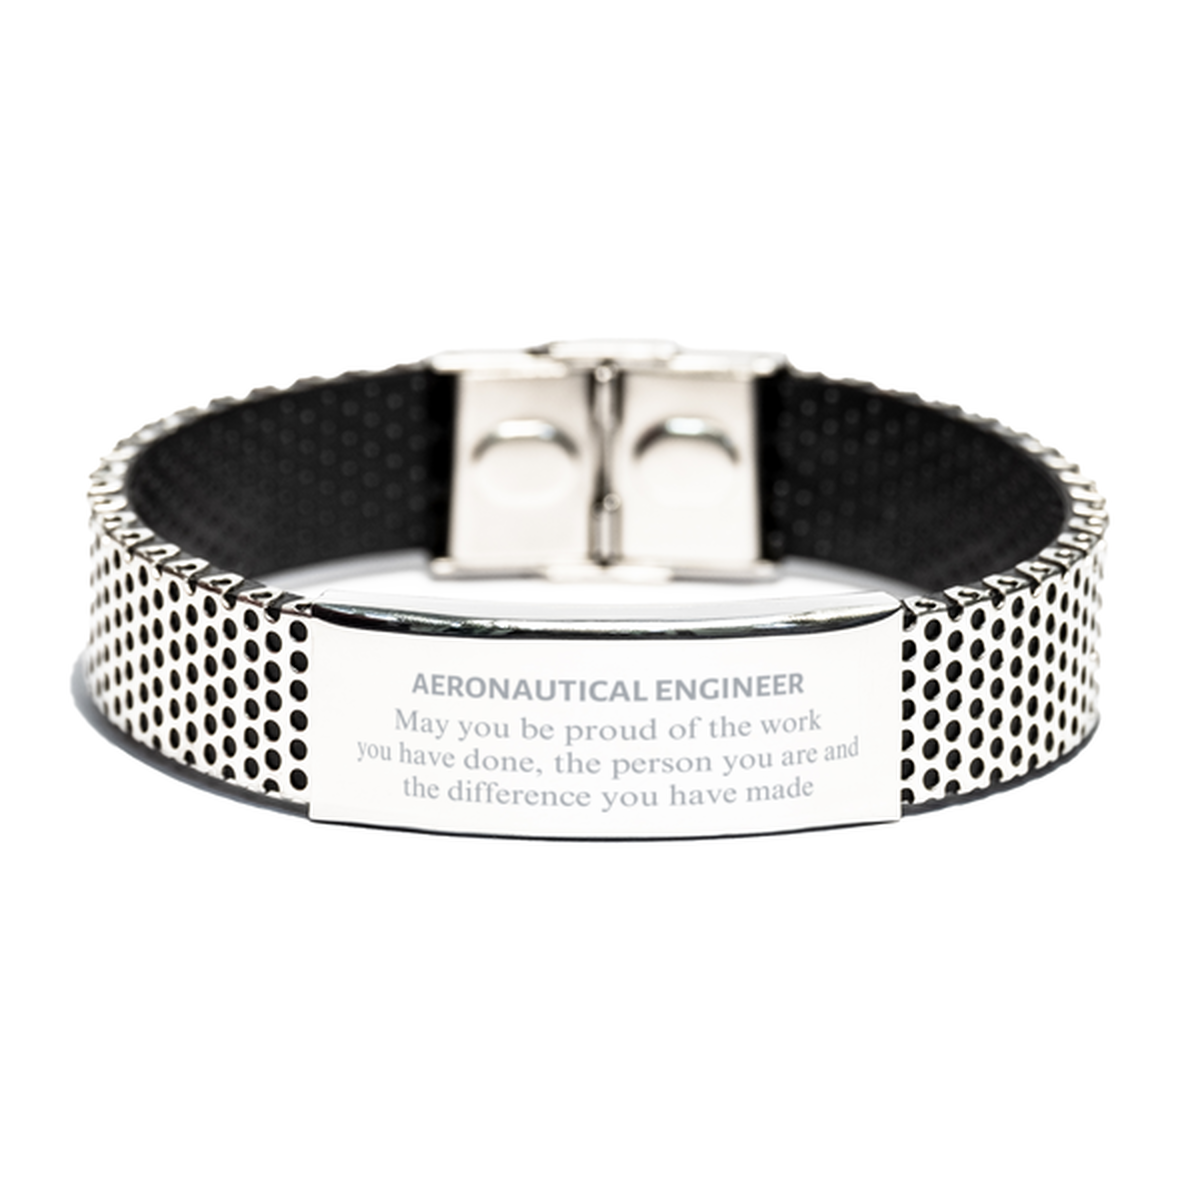 Aeronautical Engineer May you be proud of the work you have done, Retirement Aeronautical Engineer Stainless Steel Bracelet for Colleague Appreciation Gifts Amazing for Aeronautical Engineer